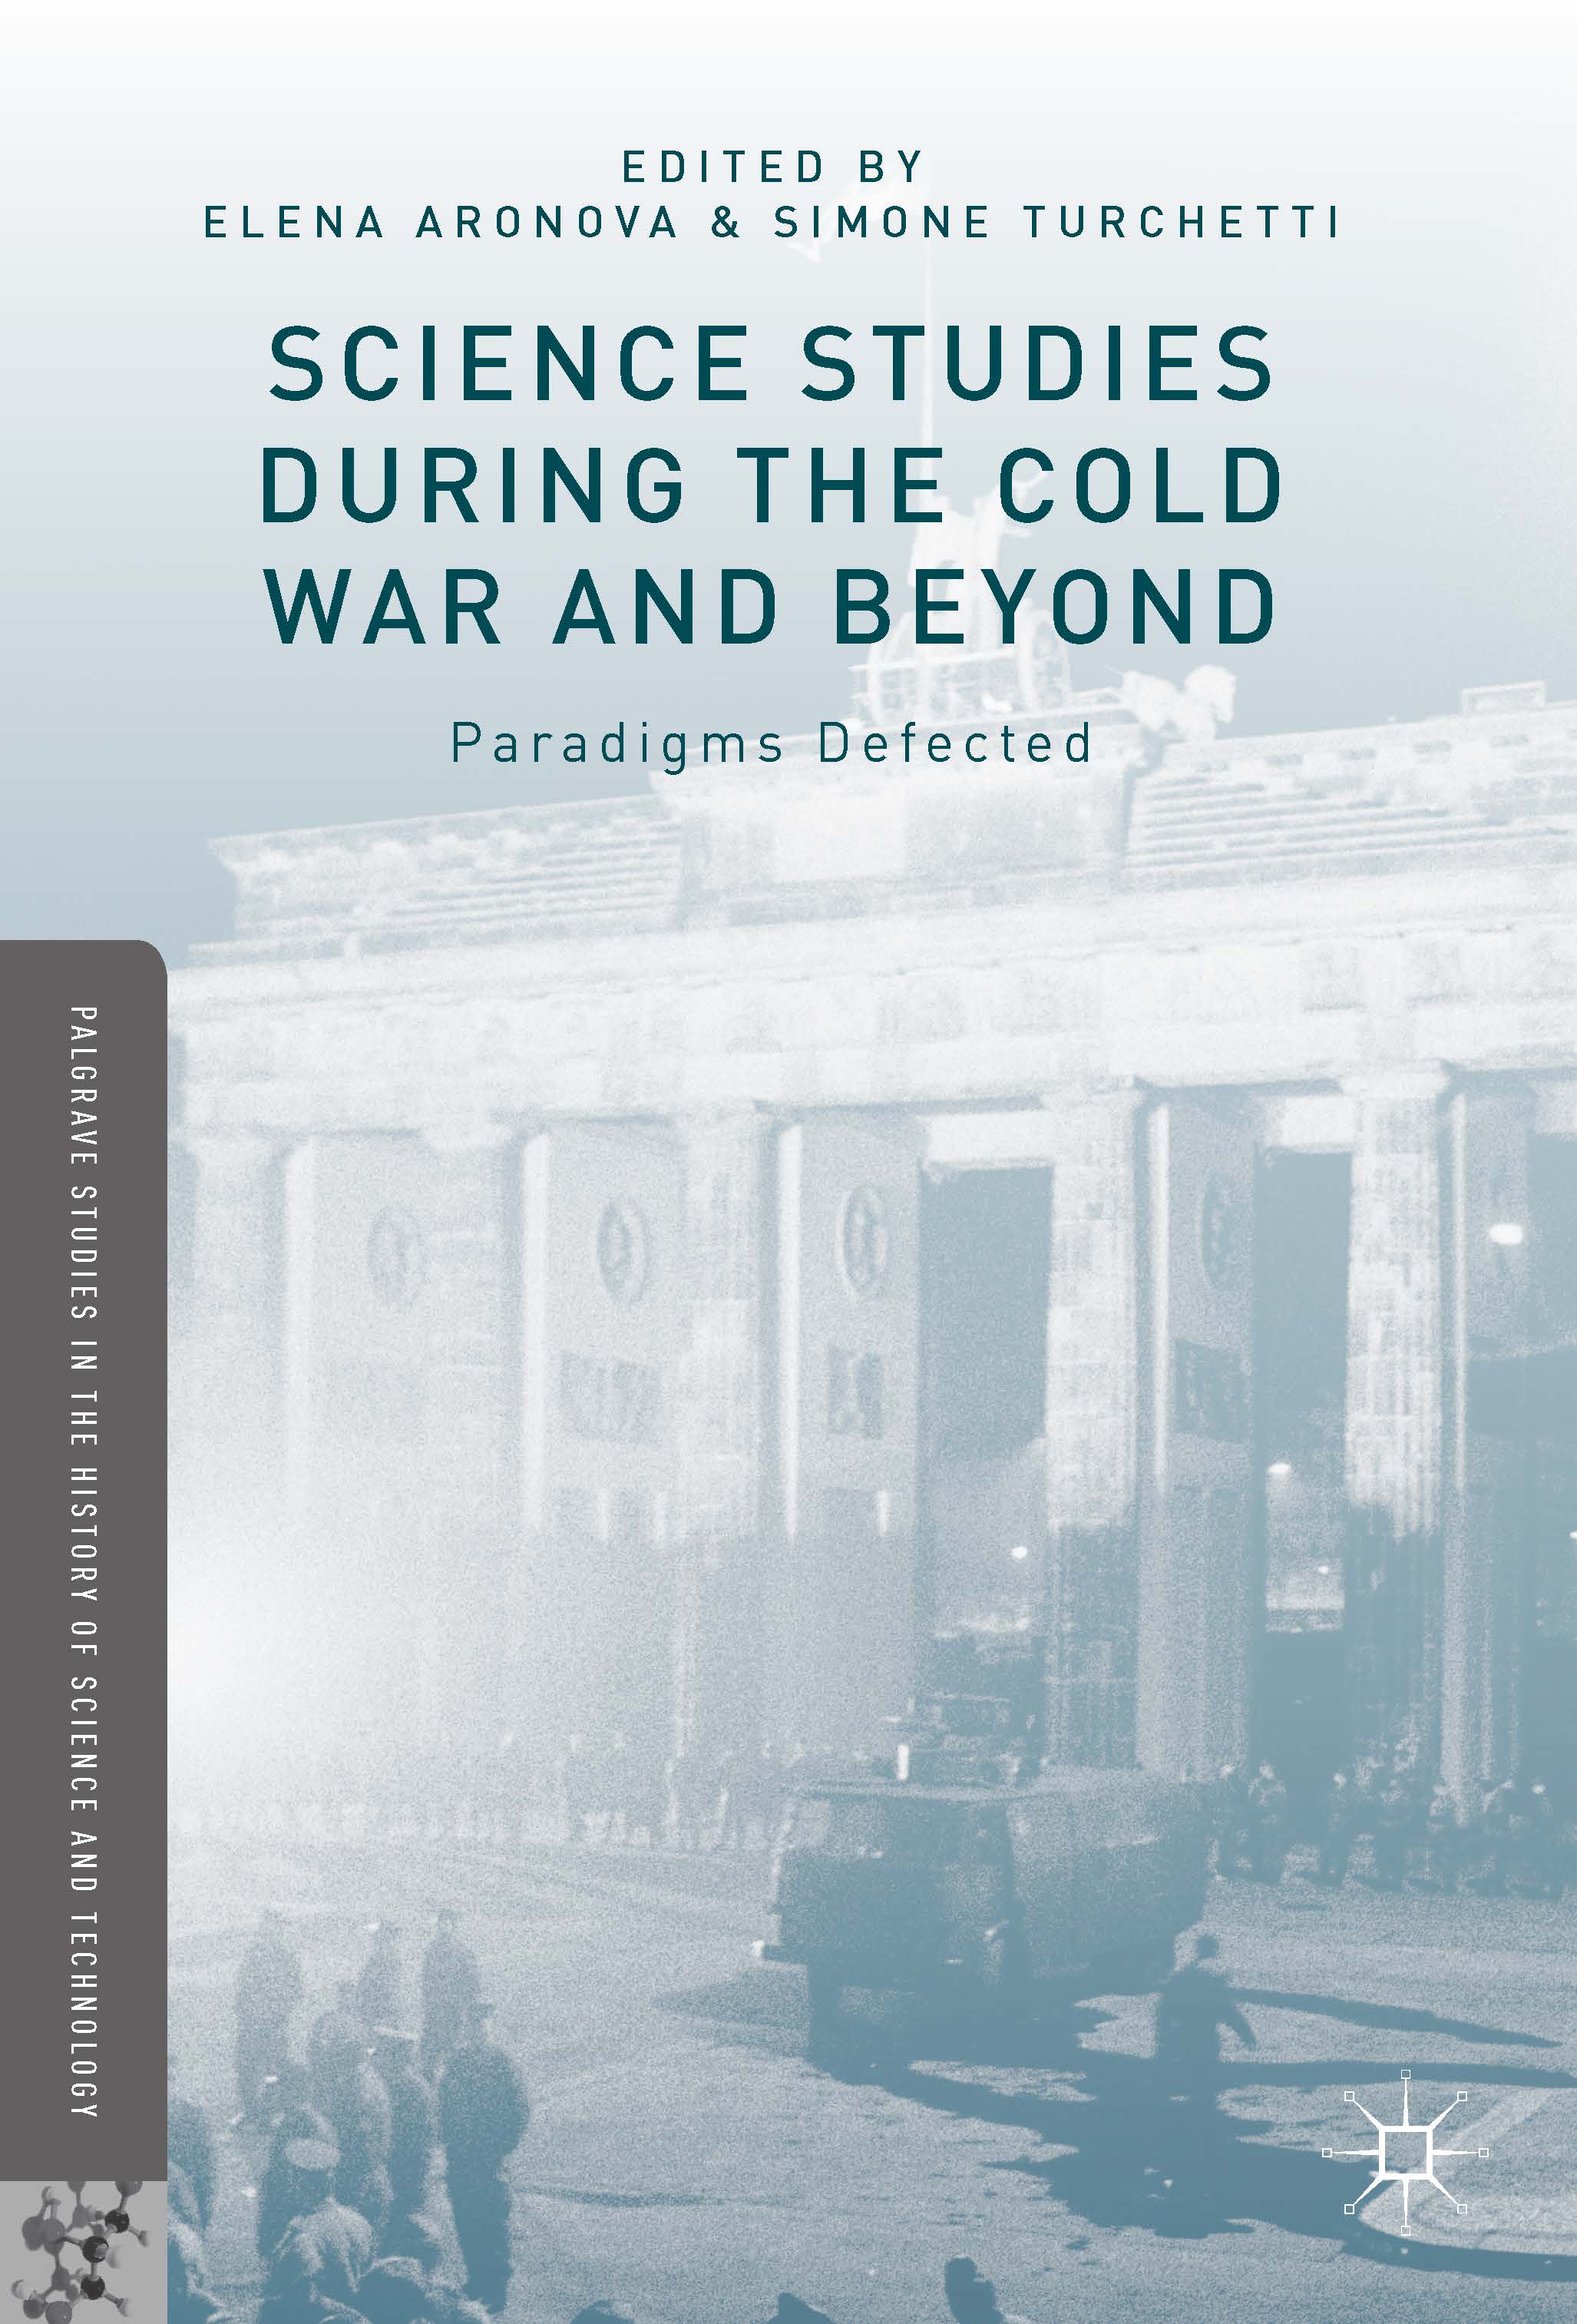 bookcover of book edited in part by Elena Aronova titled Science Studies During the Cold War and Beyond Paradigms Defected